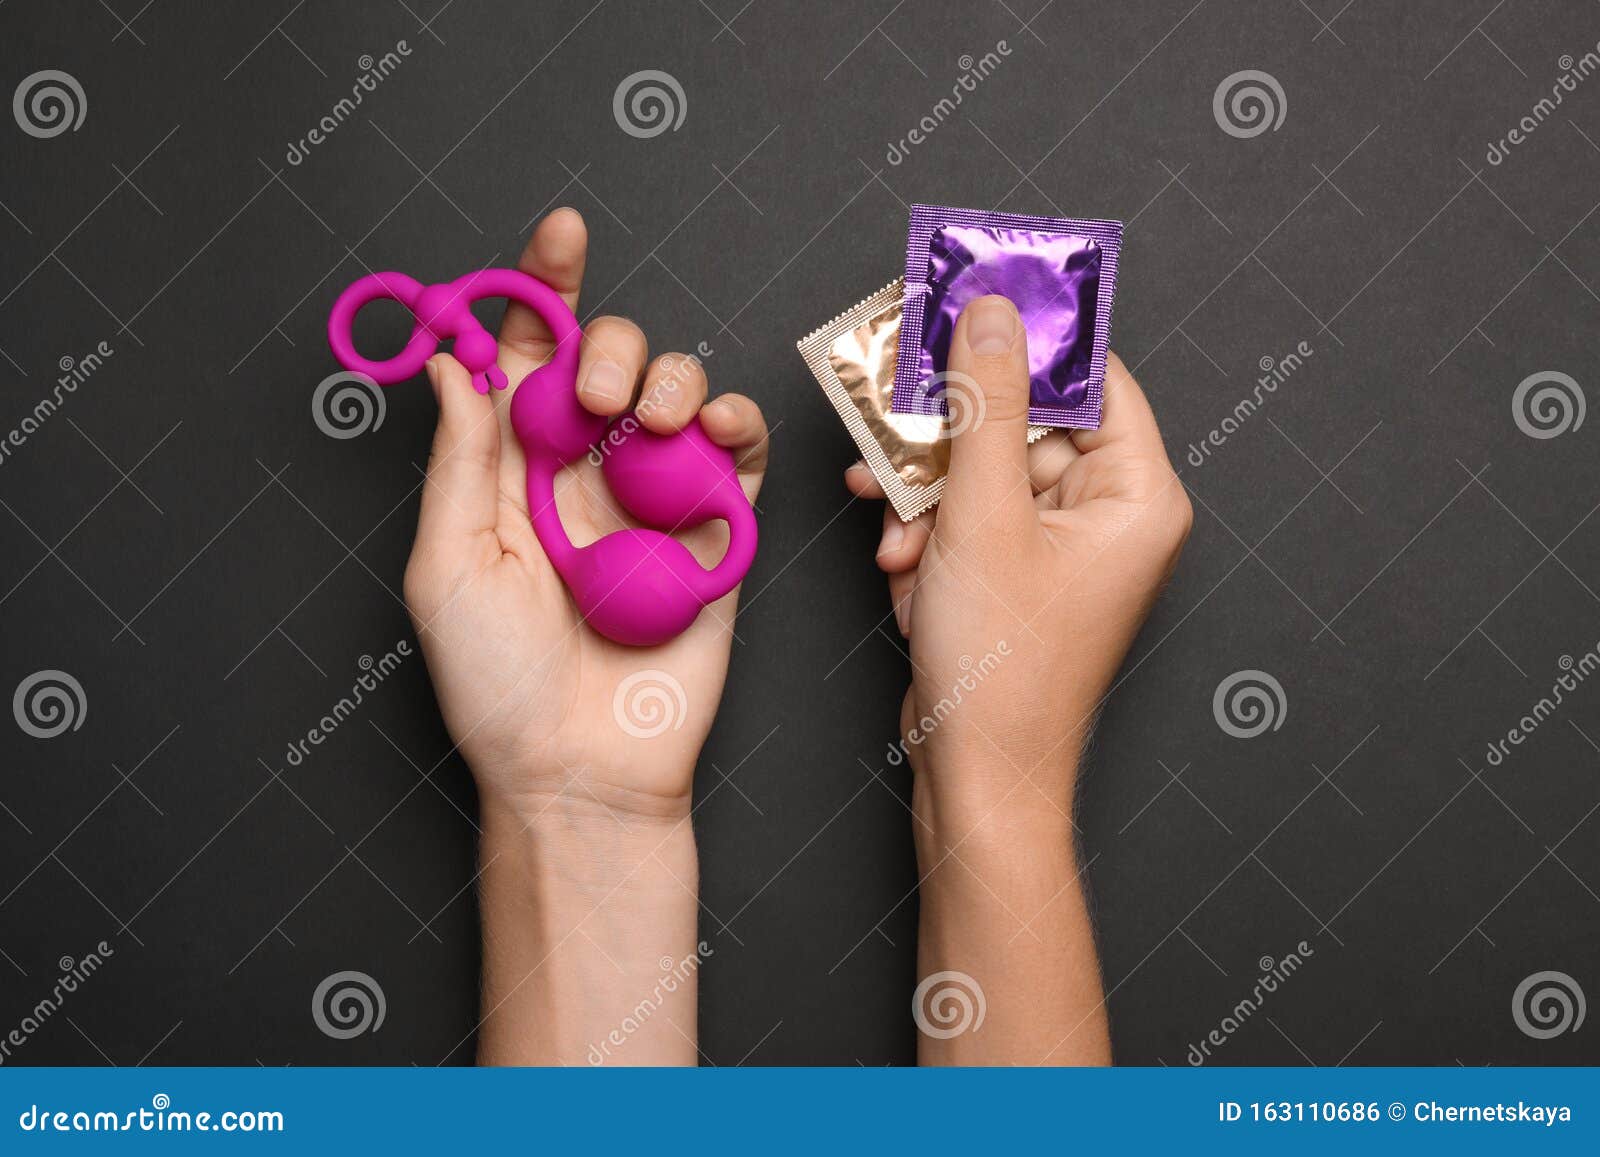 Woman with Anal Balls Beads and Condoms on Background, Top View pic